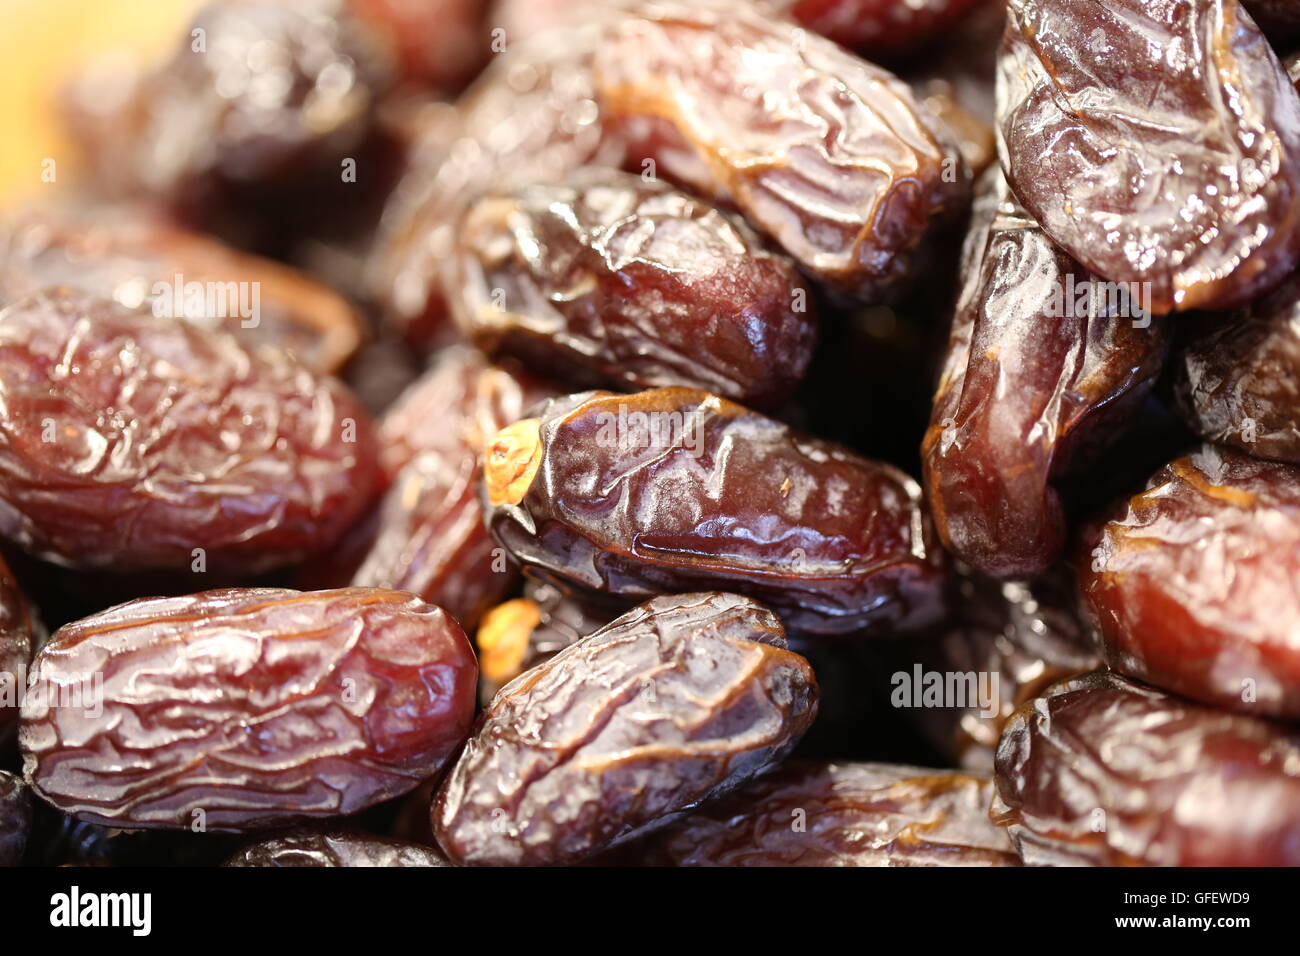 Dates. Pile of dry dates, close up. Stock Photo